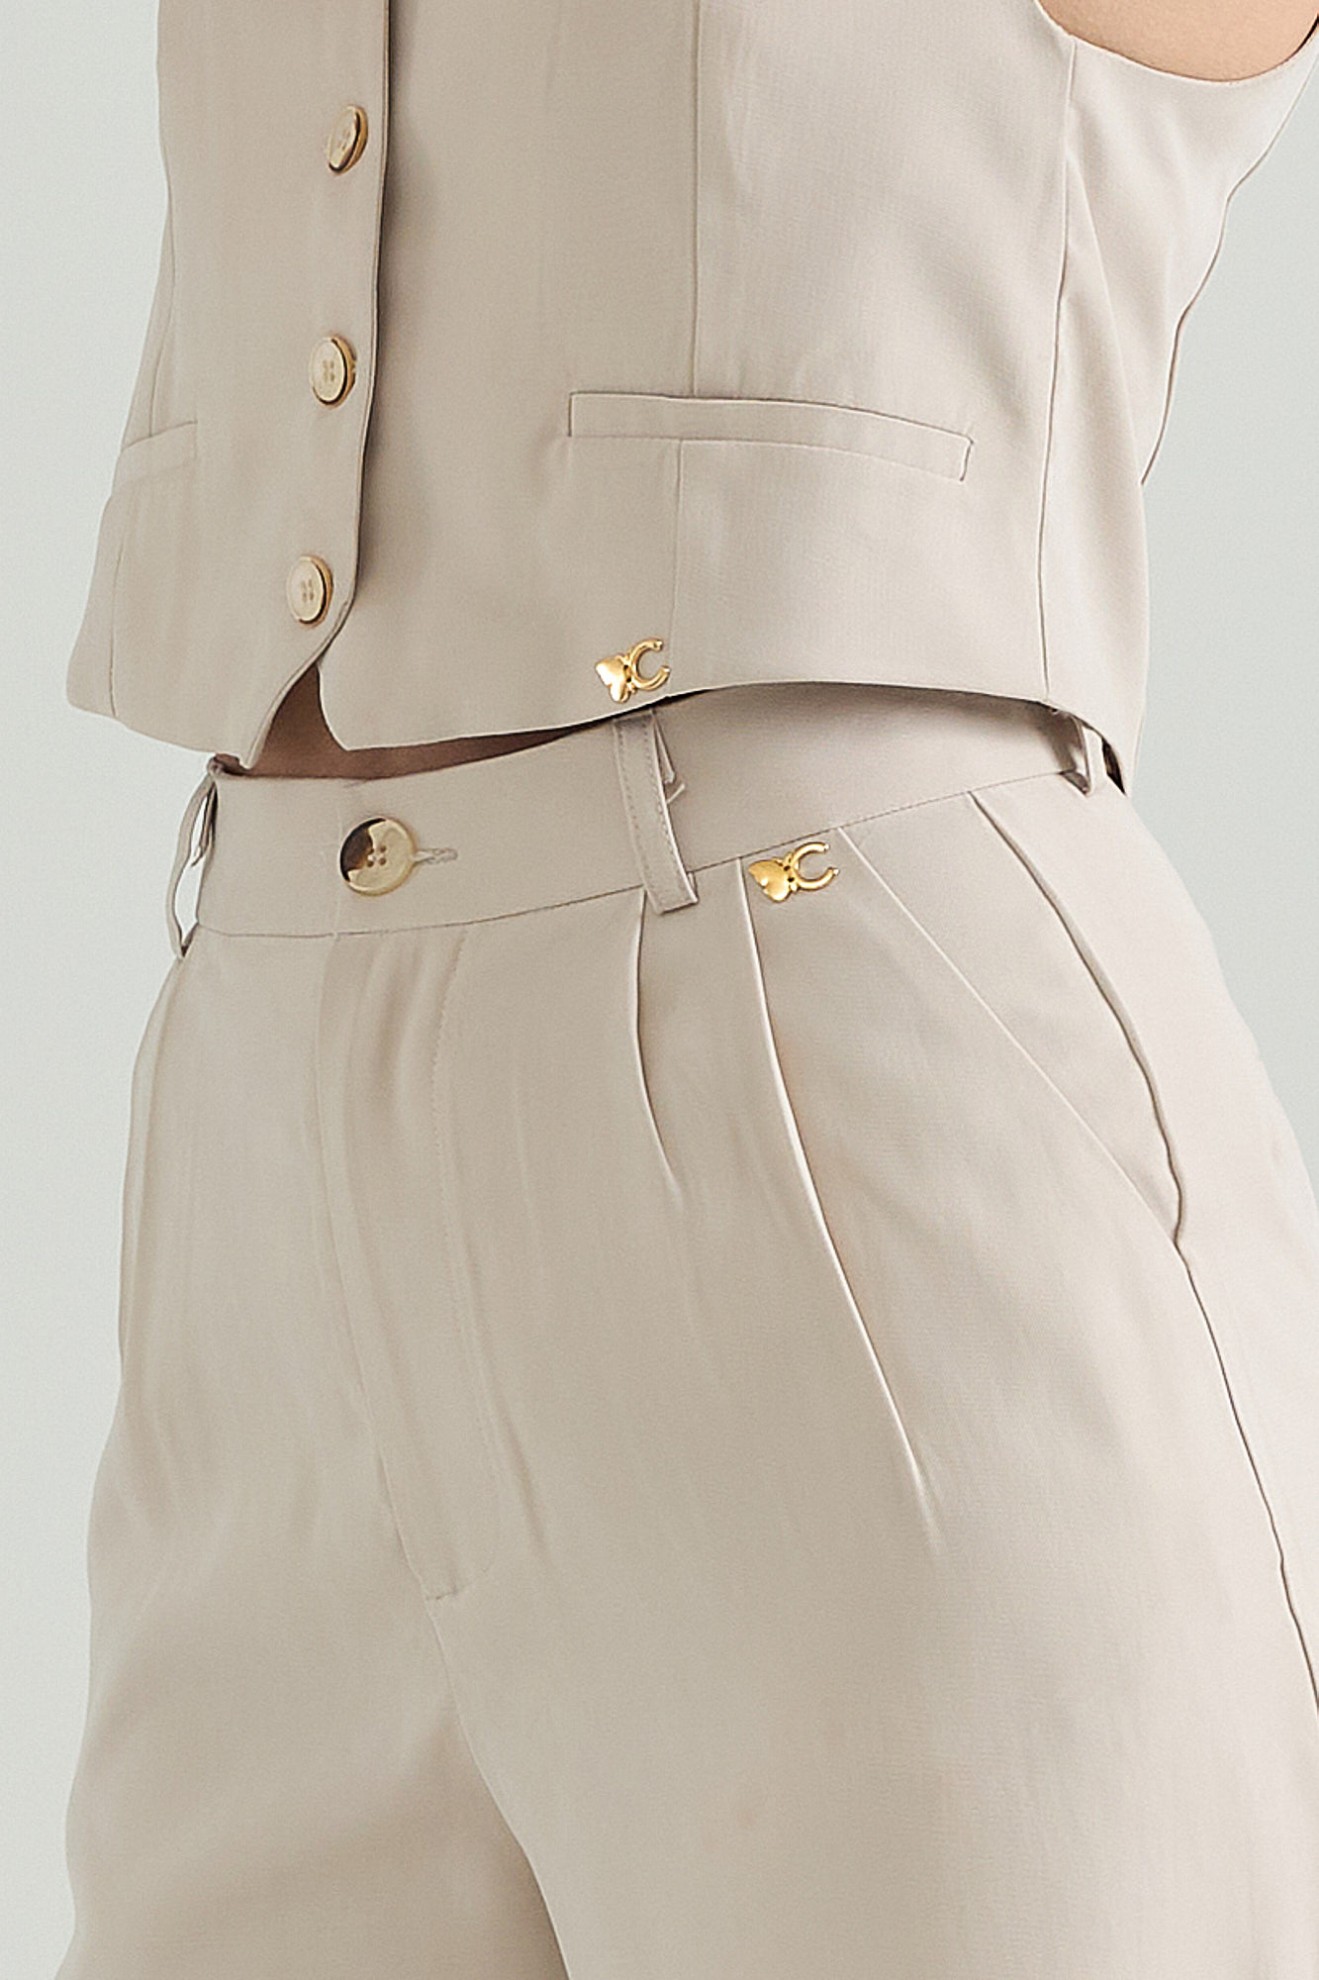 Picture of Tailored basic shorts